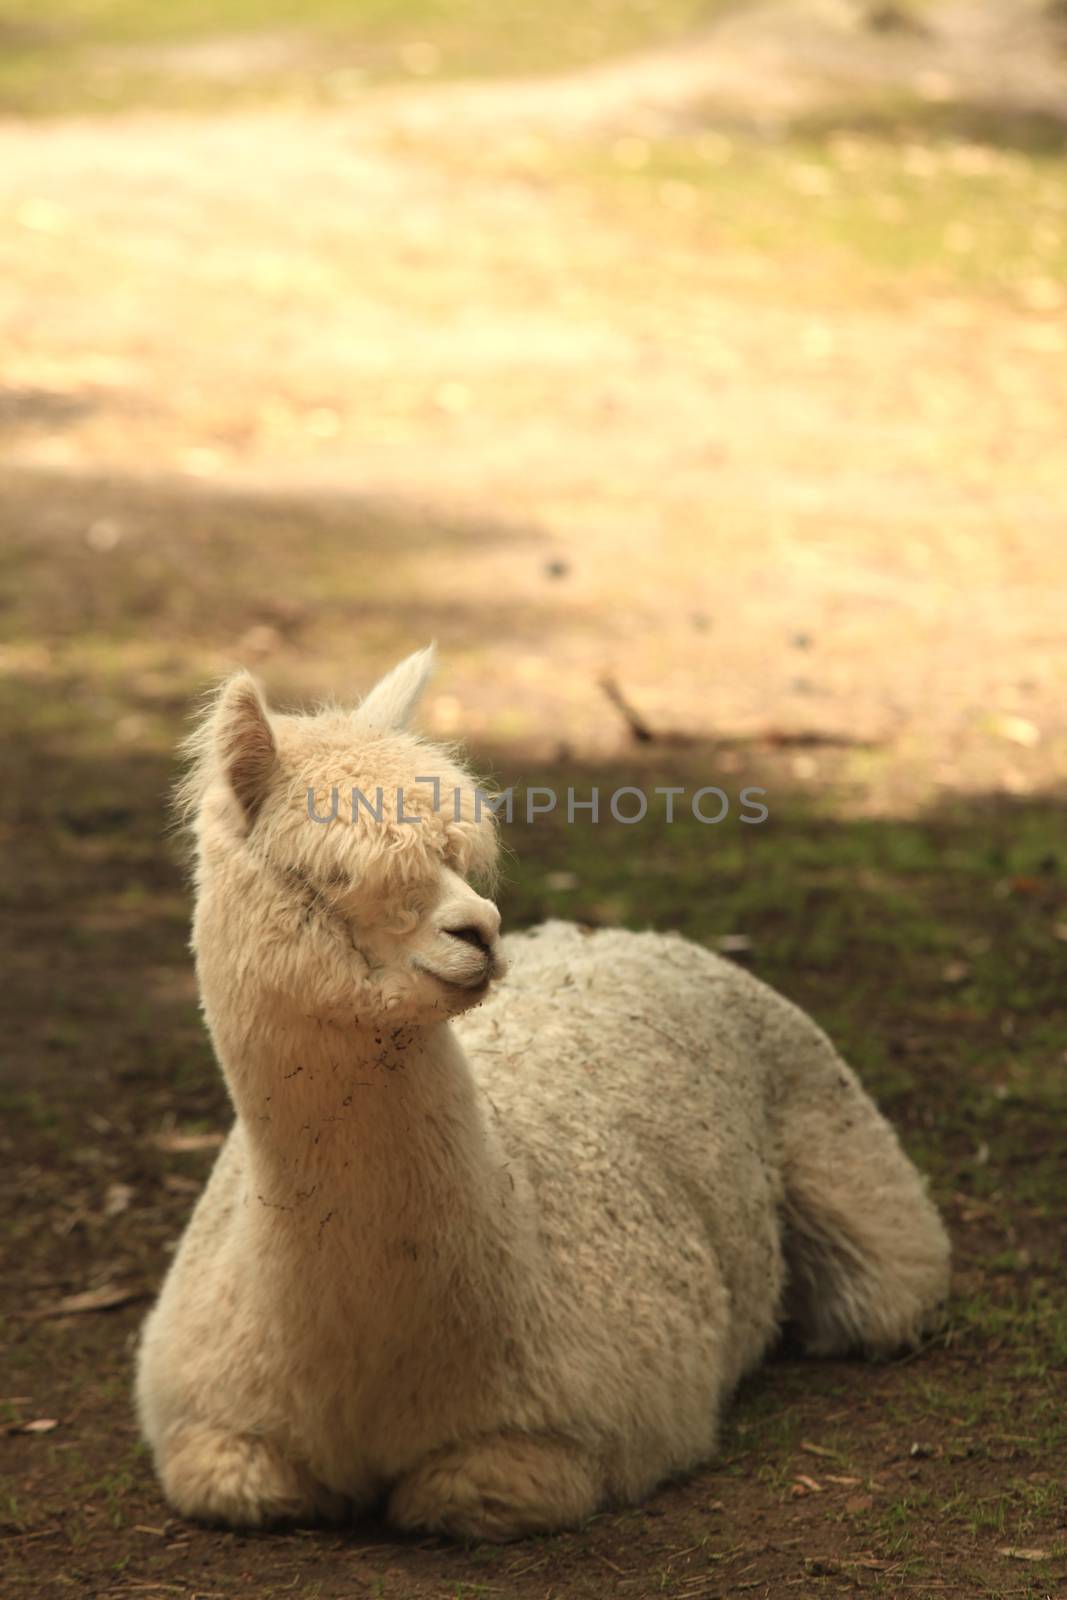 Alpaca Resting in a Petting Zoo Outdoors